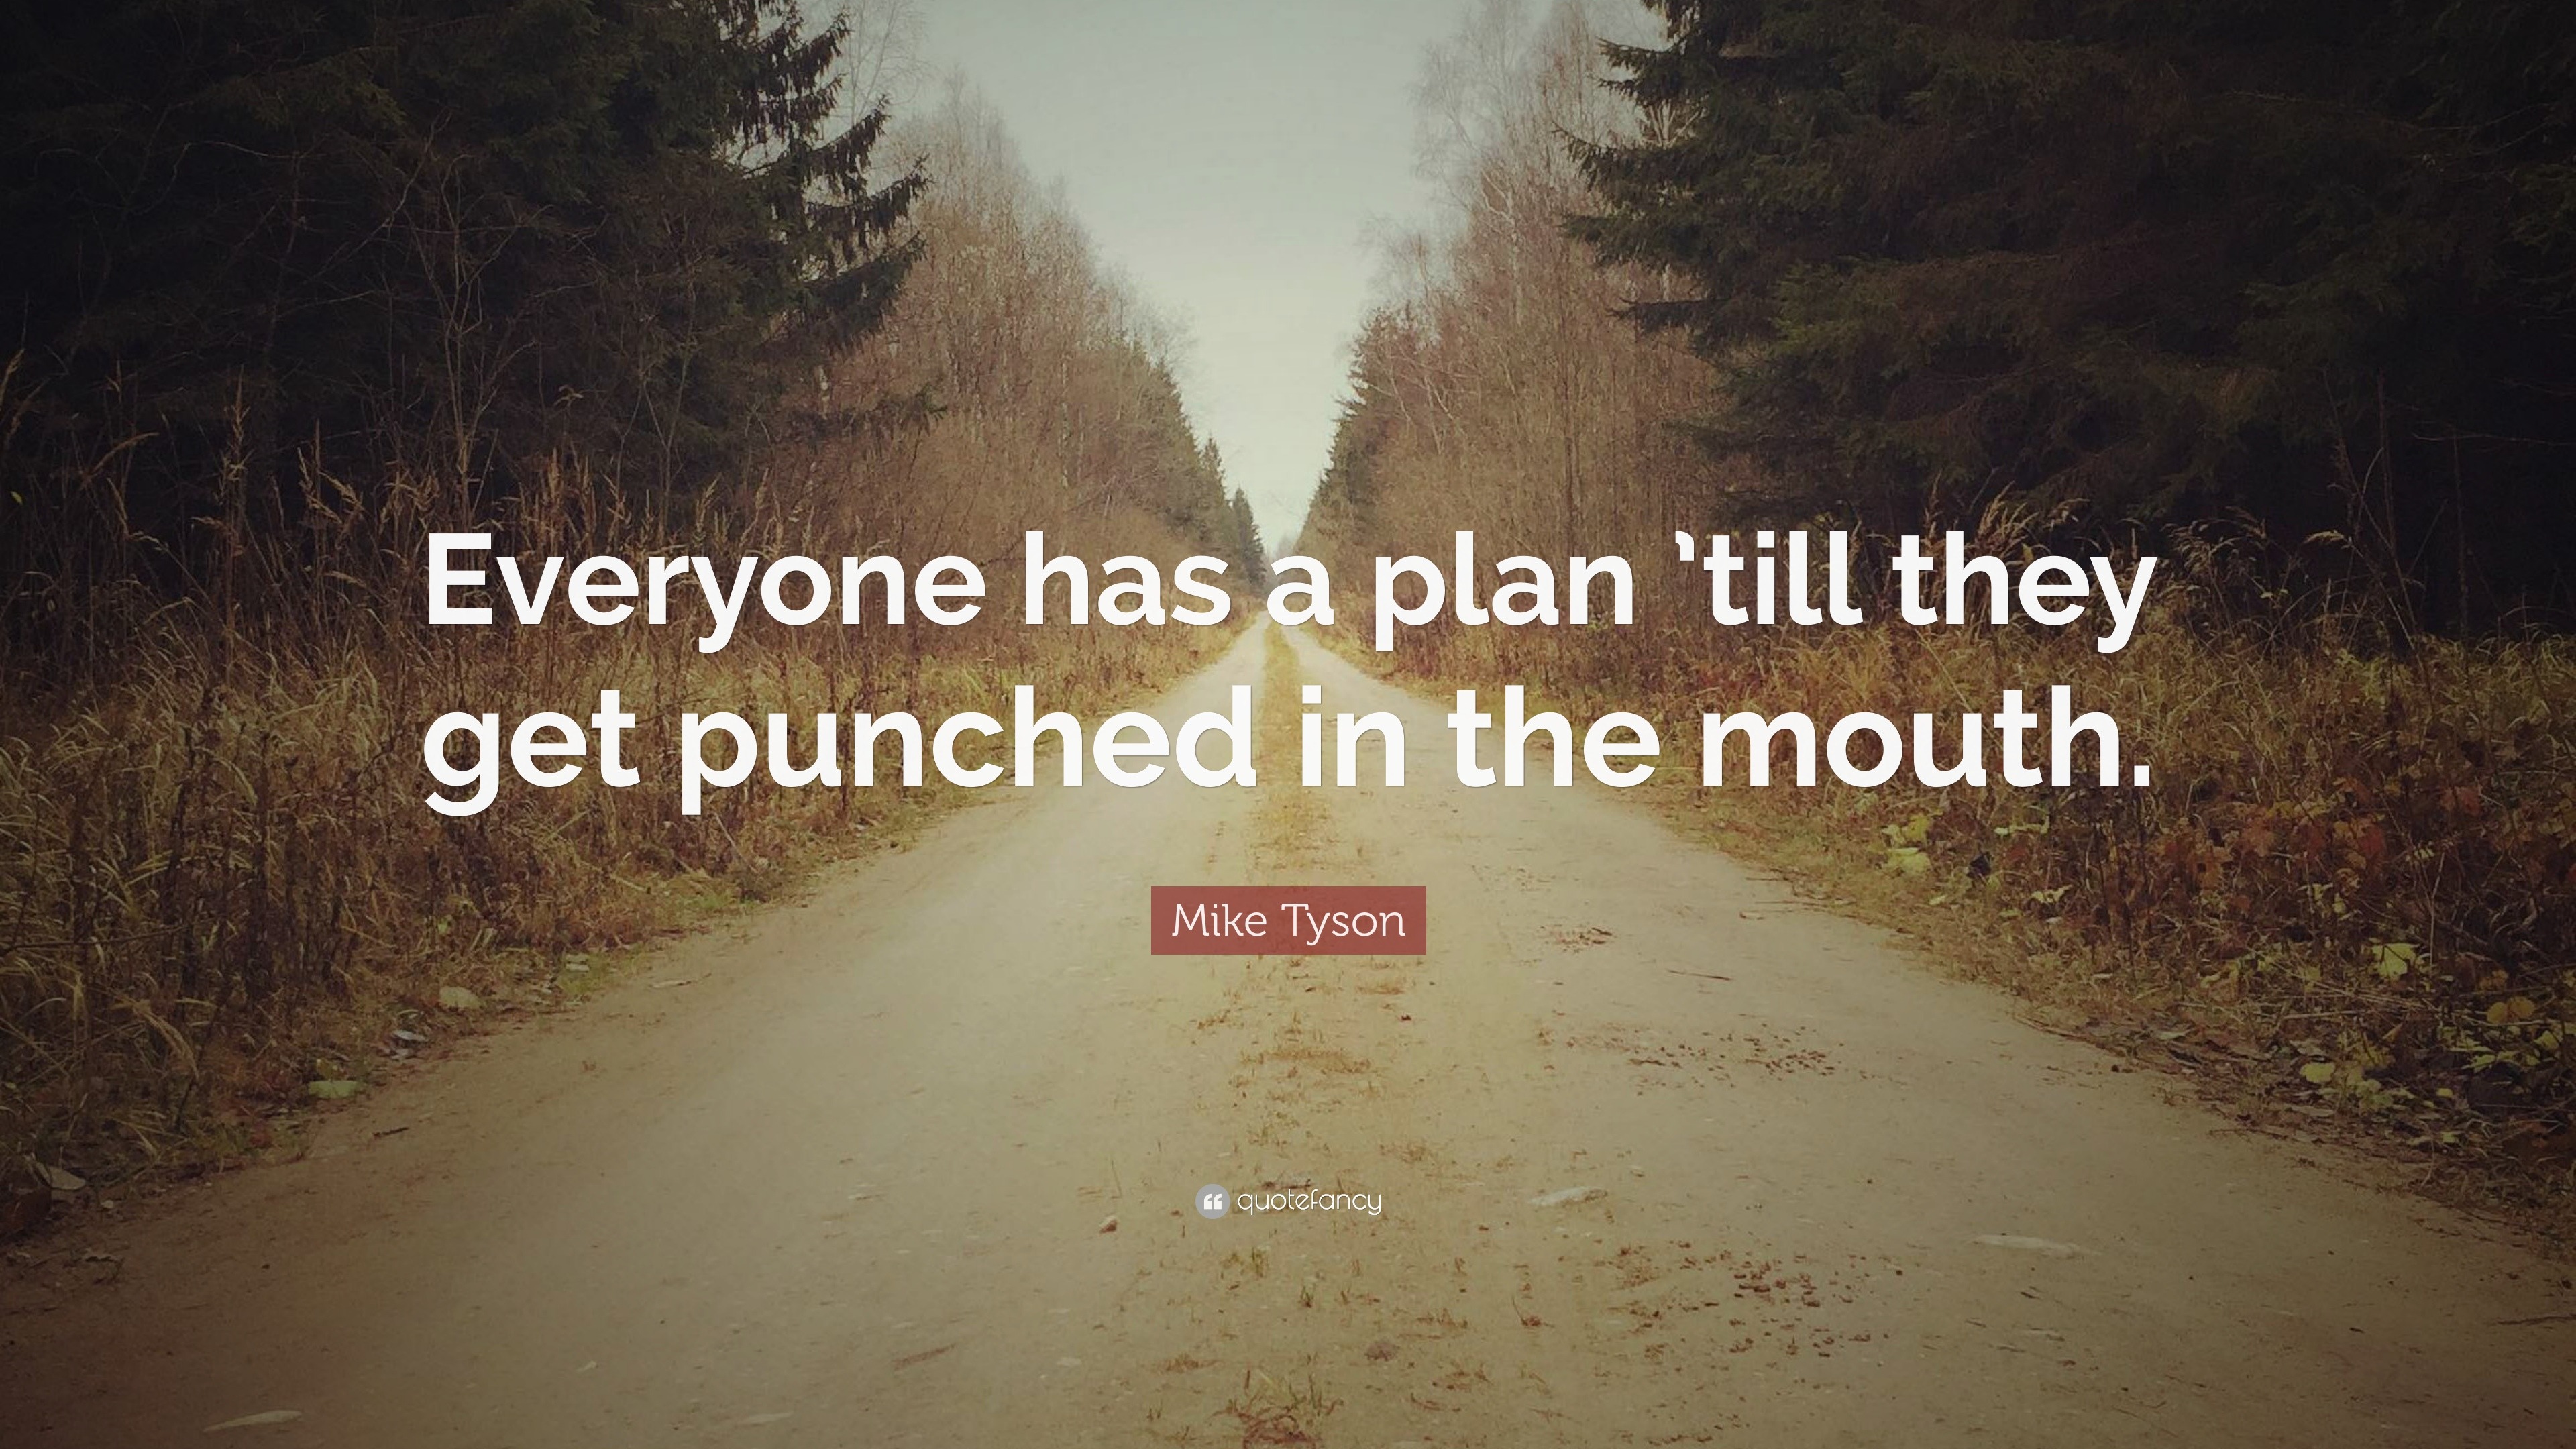 Mike Tyson Quote Everyone Has A Plan Till They Get Punched In The Mouth